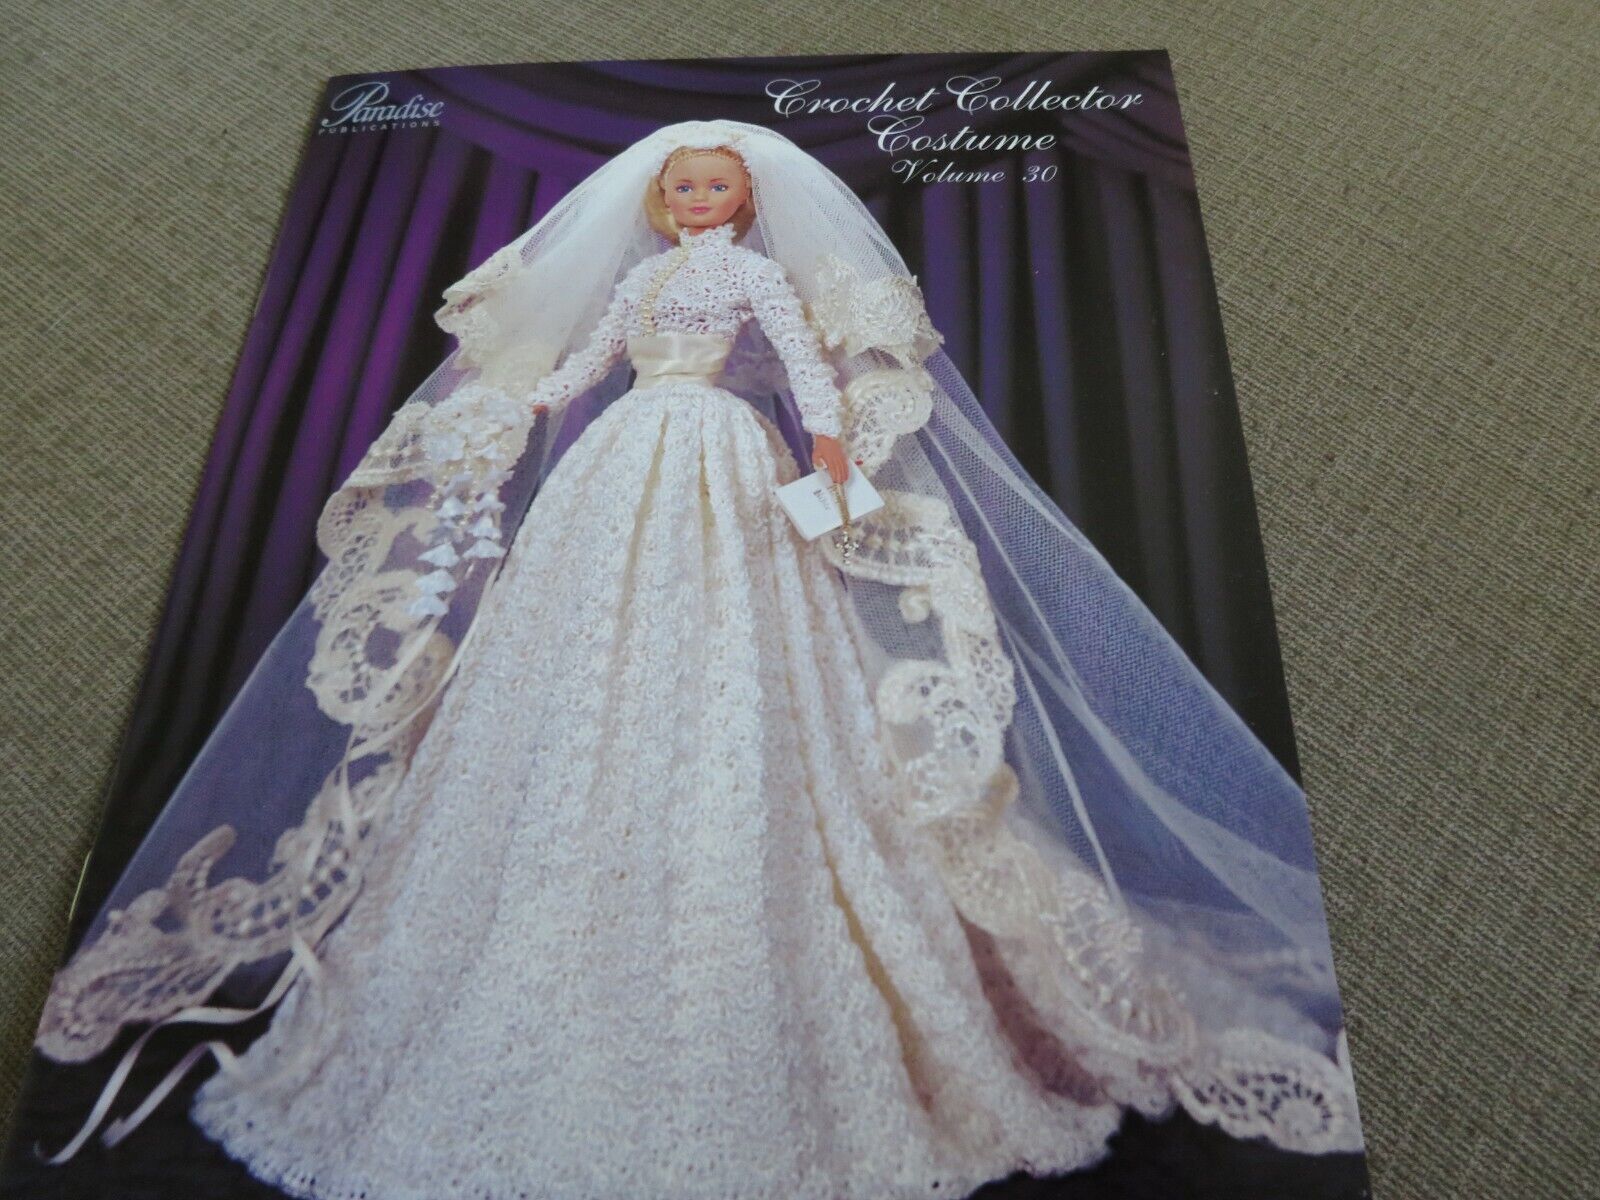 67% OFF Max 62% OFF of fixed price Paradise Crochet Costume Pattern 1956 GRACE WEDDING KELLEY'S GO